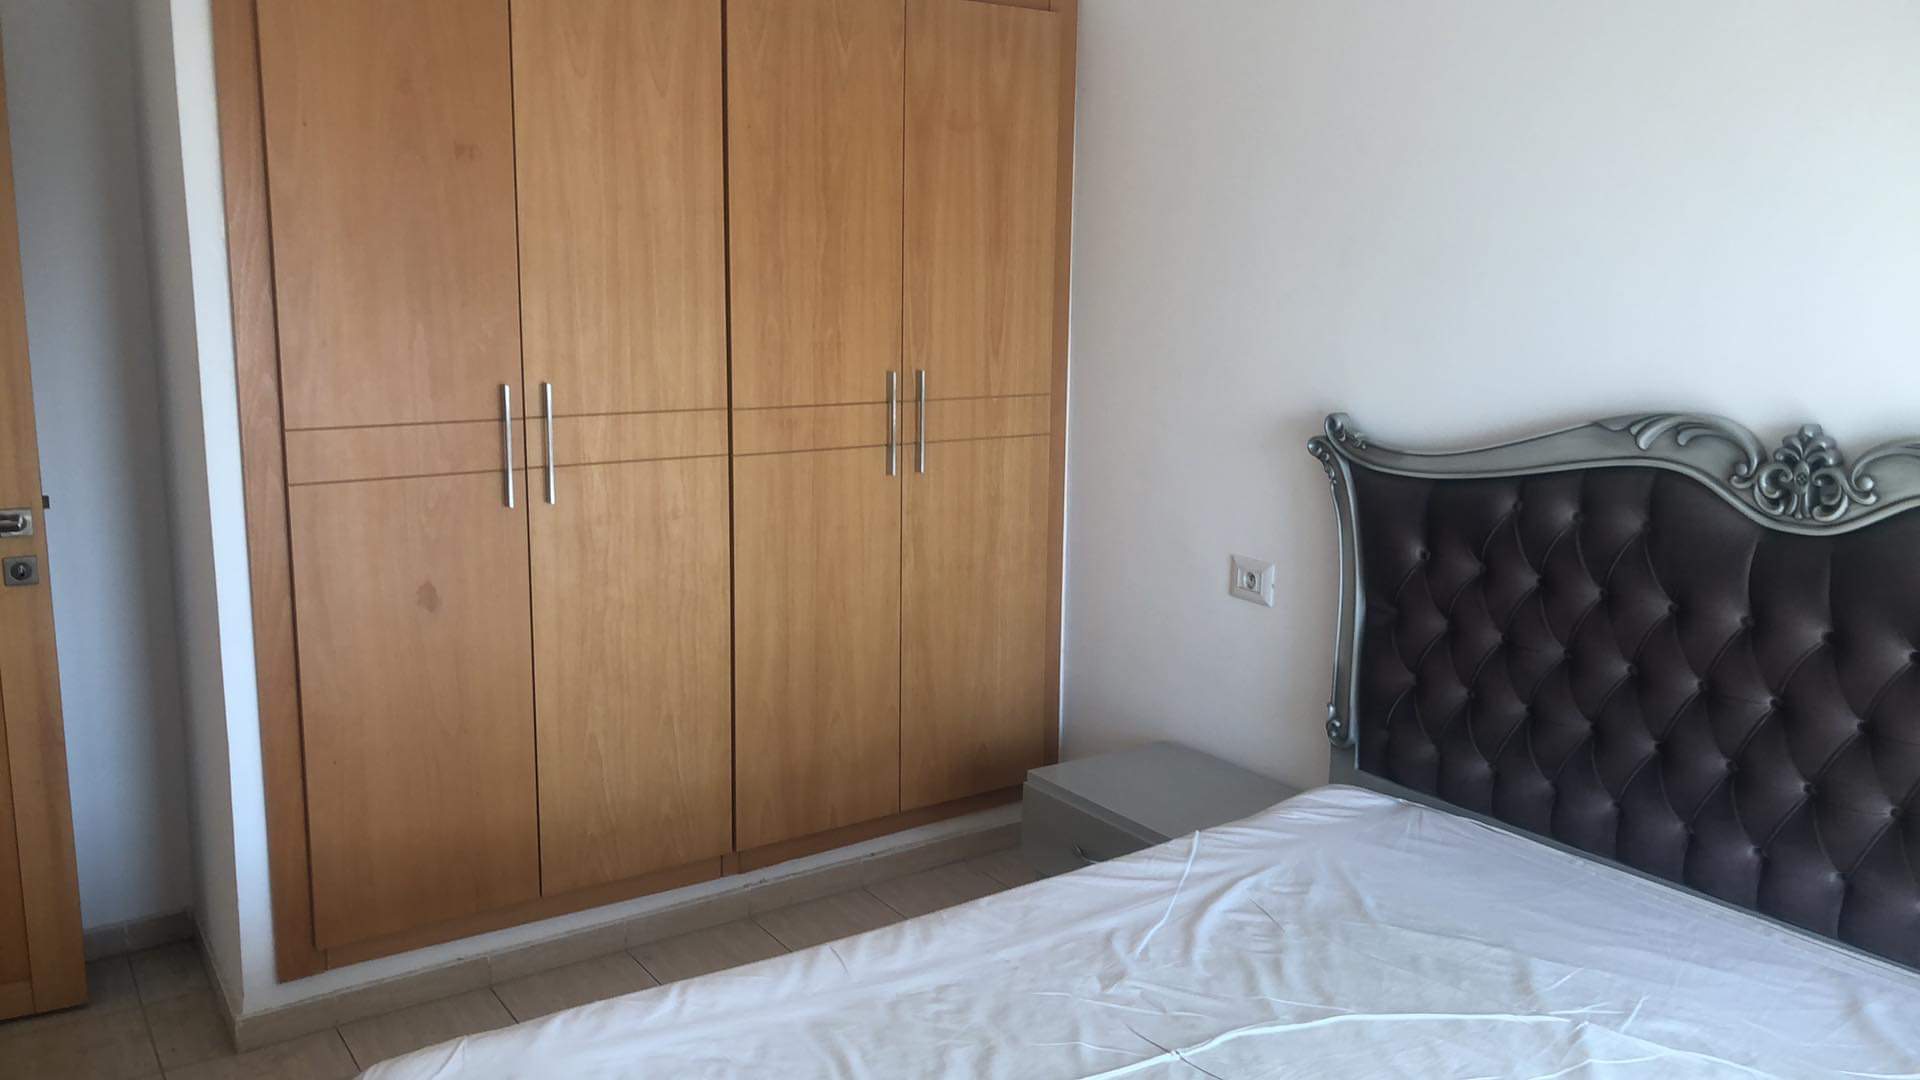 Raoued Cite Ennkhilet Location Appart. 1 pice Appartement meubl s1 comme neuf